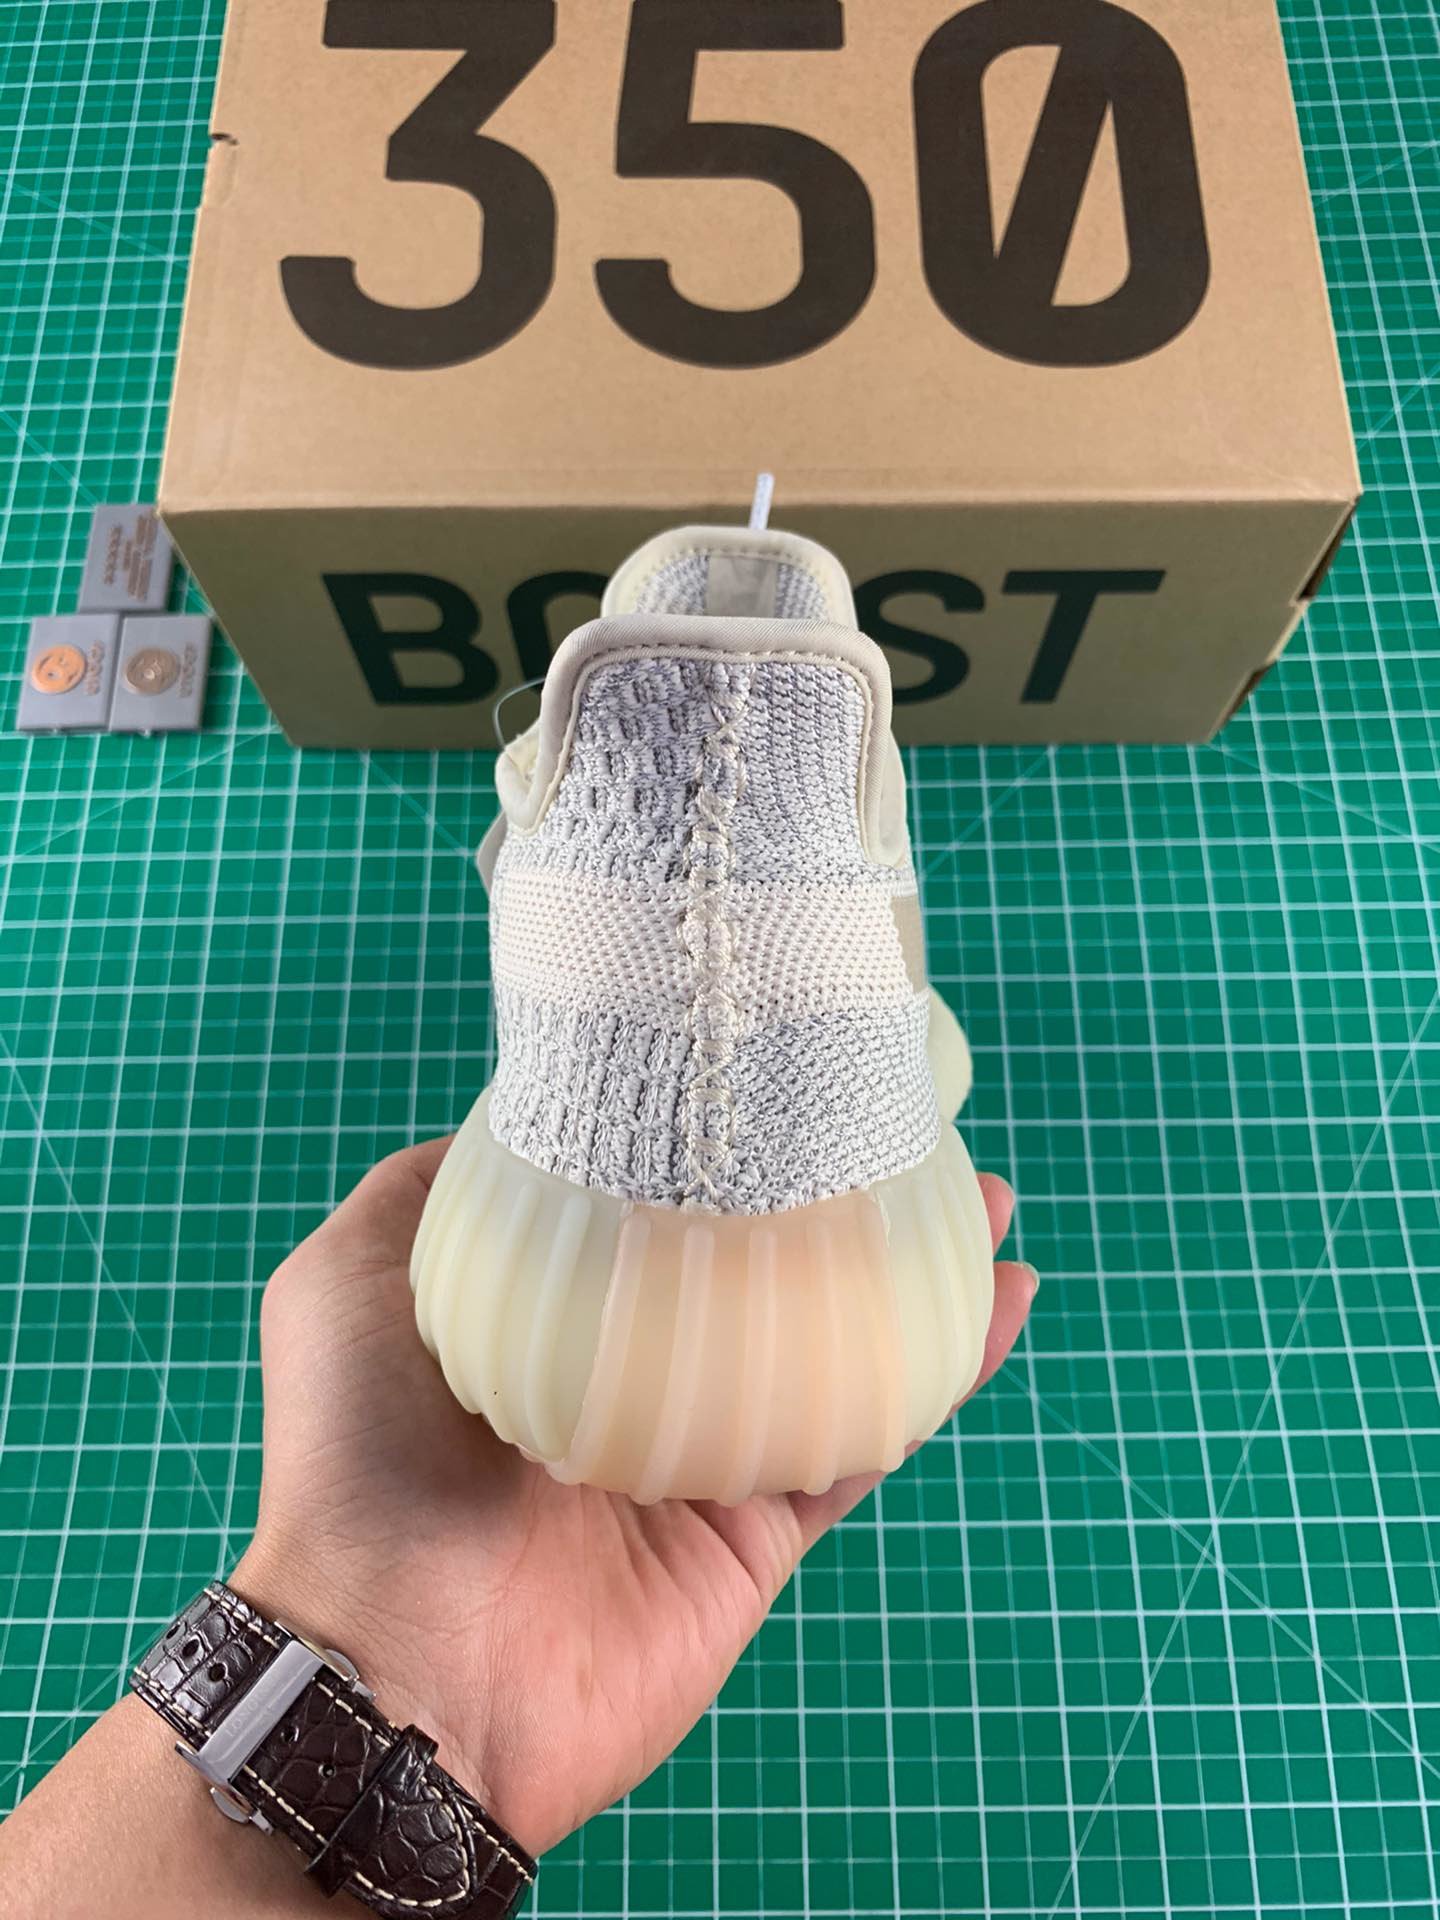 2020 cheap Adidas yeezy Boost 350 V2 Sneakers Unisex # 225172, cheap Adidas Yeezy Shoes, only $99!